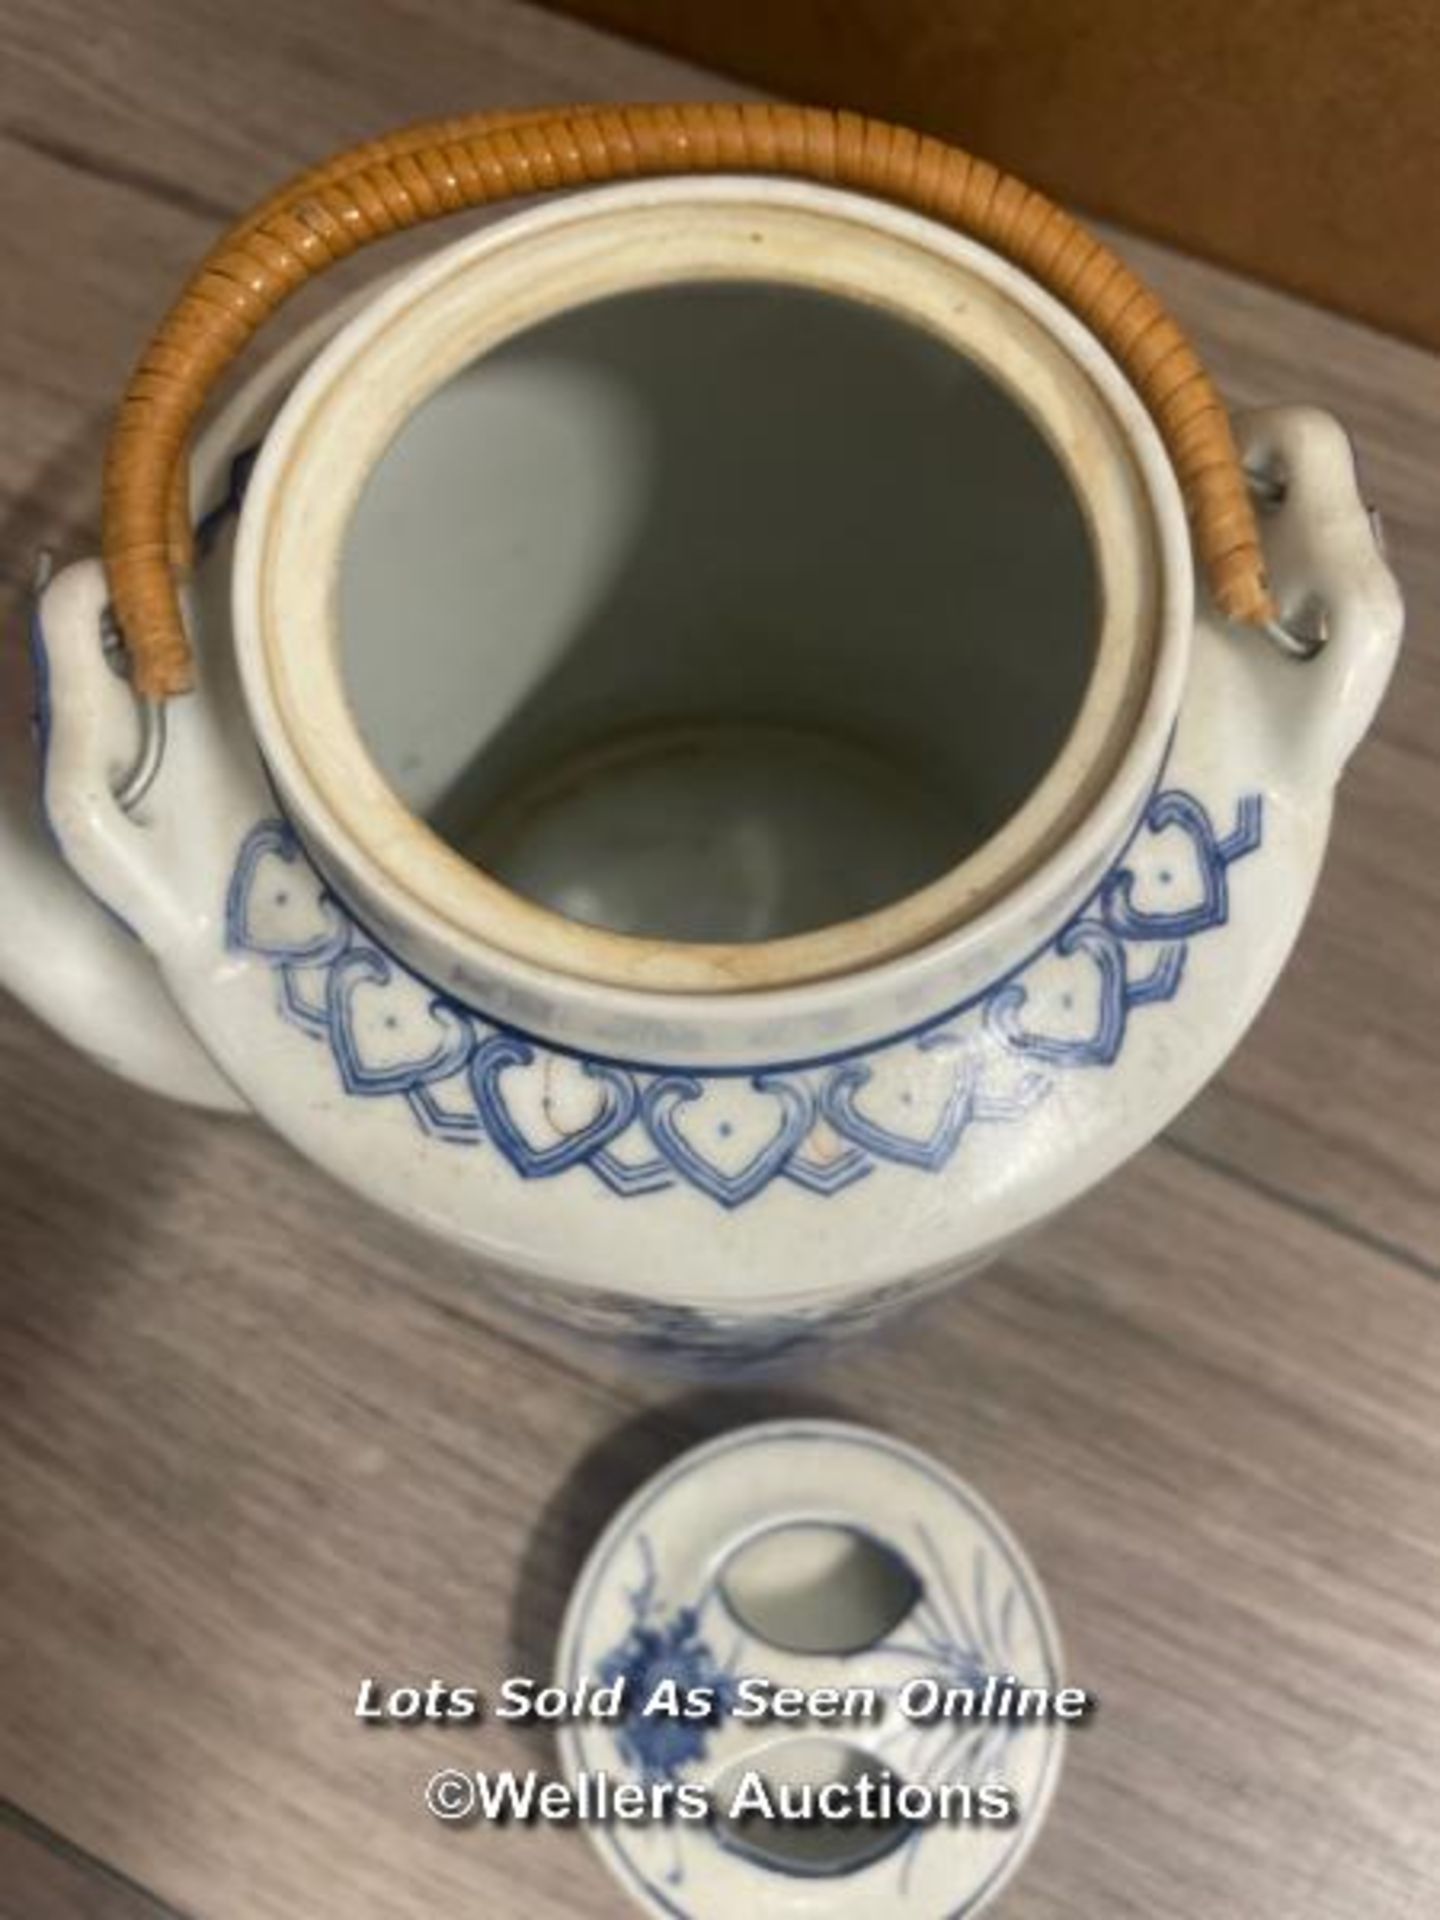 BLUE & WHITE ORIENTAL TEA POT WITH WICKER HANDLE, 16CM HIGH - Image 3 of 4